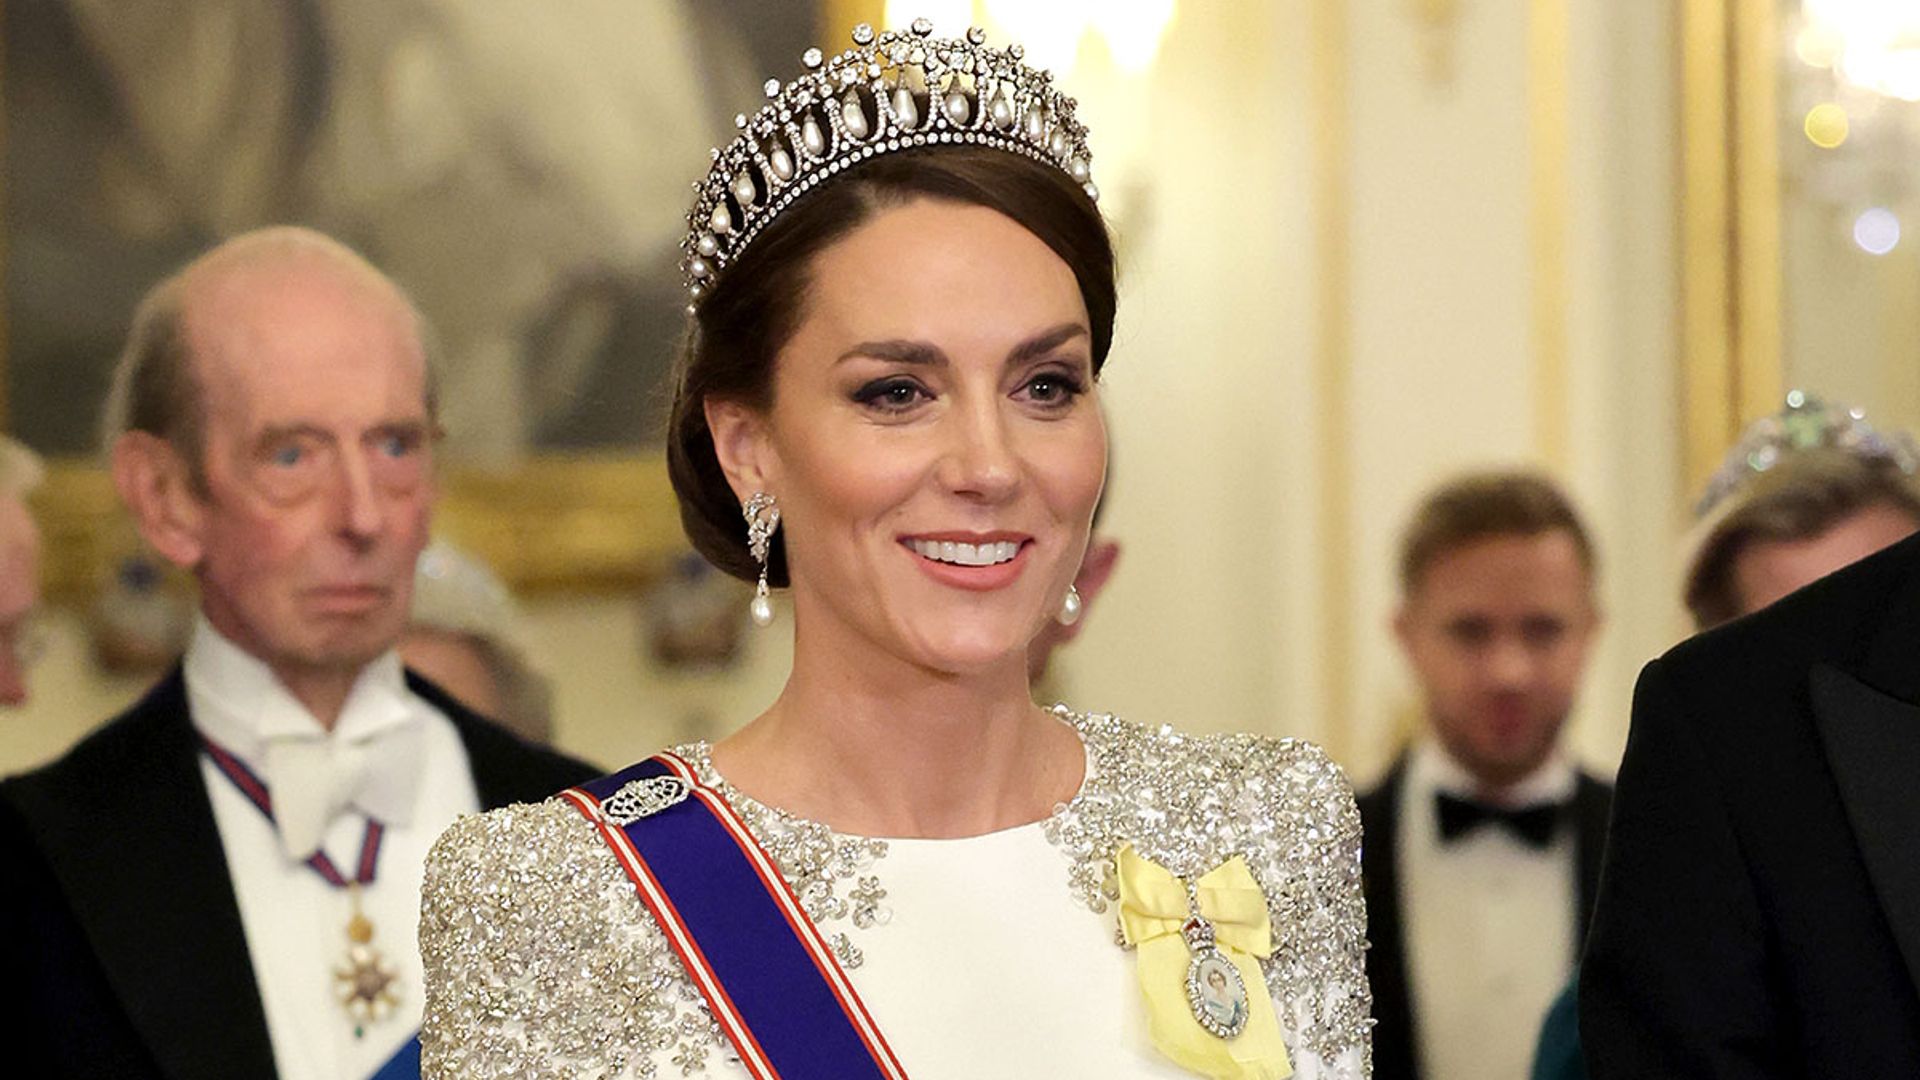 Kate Middleton S Next Tiara Moment To Coincide With Harry And Meghan S